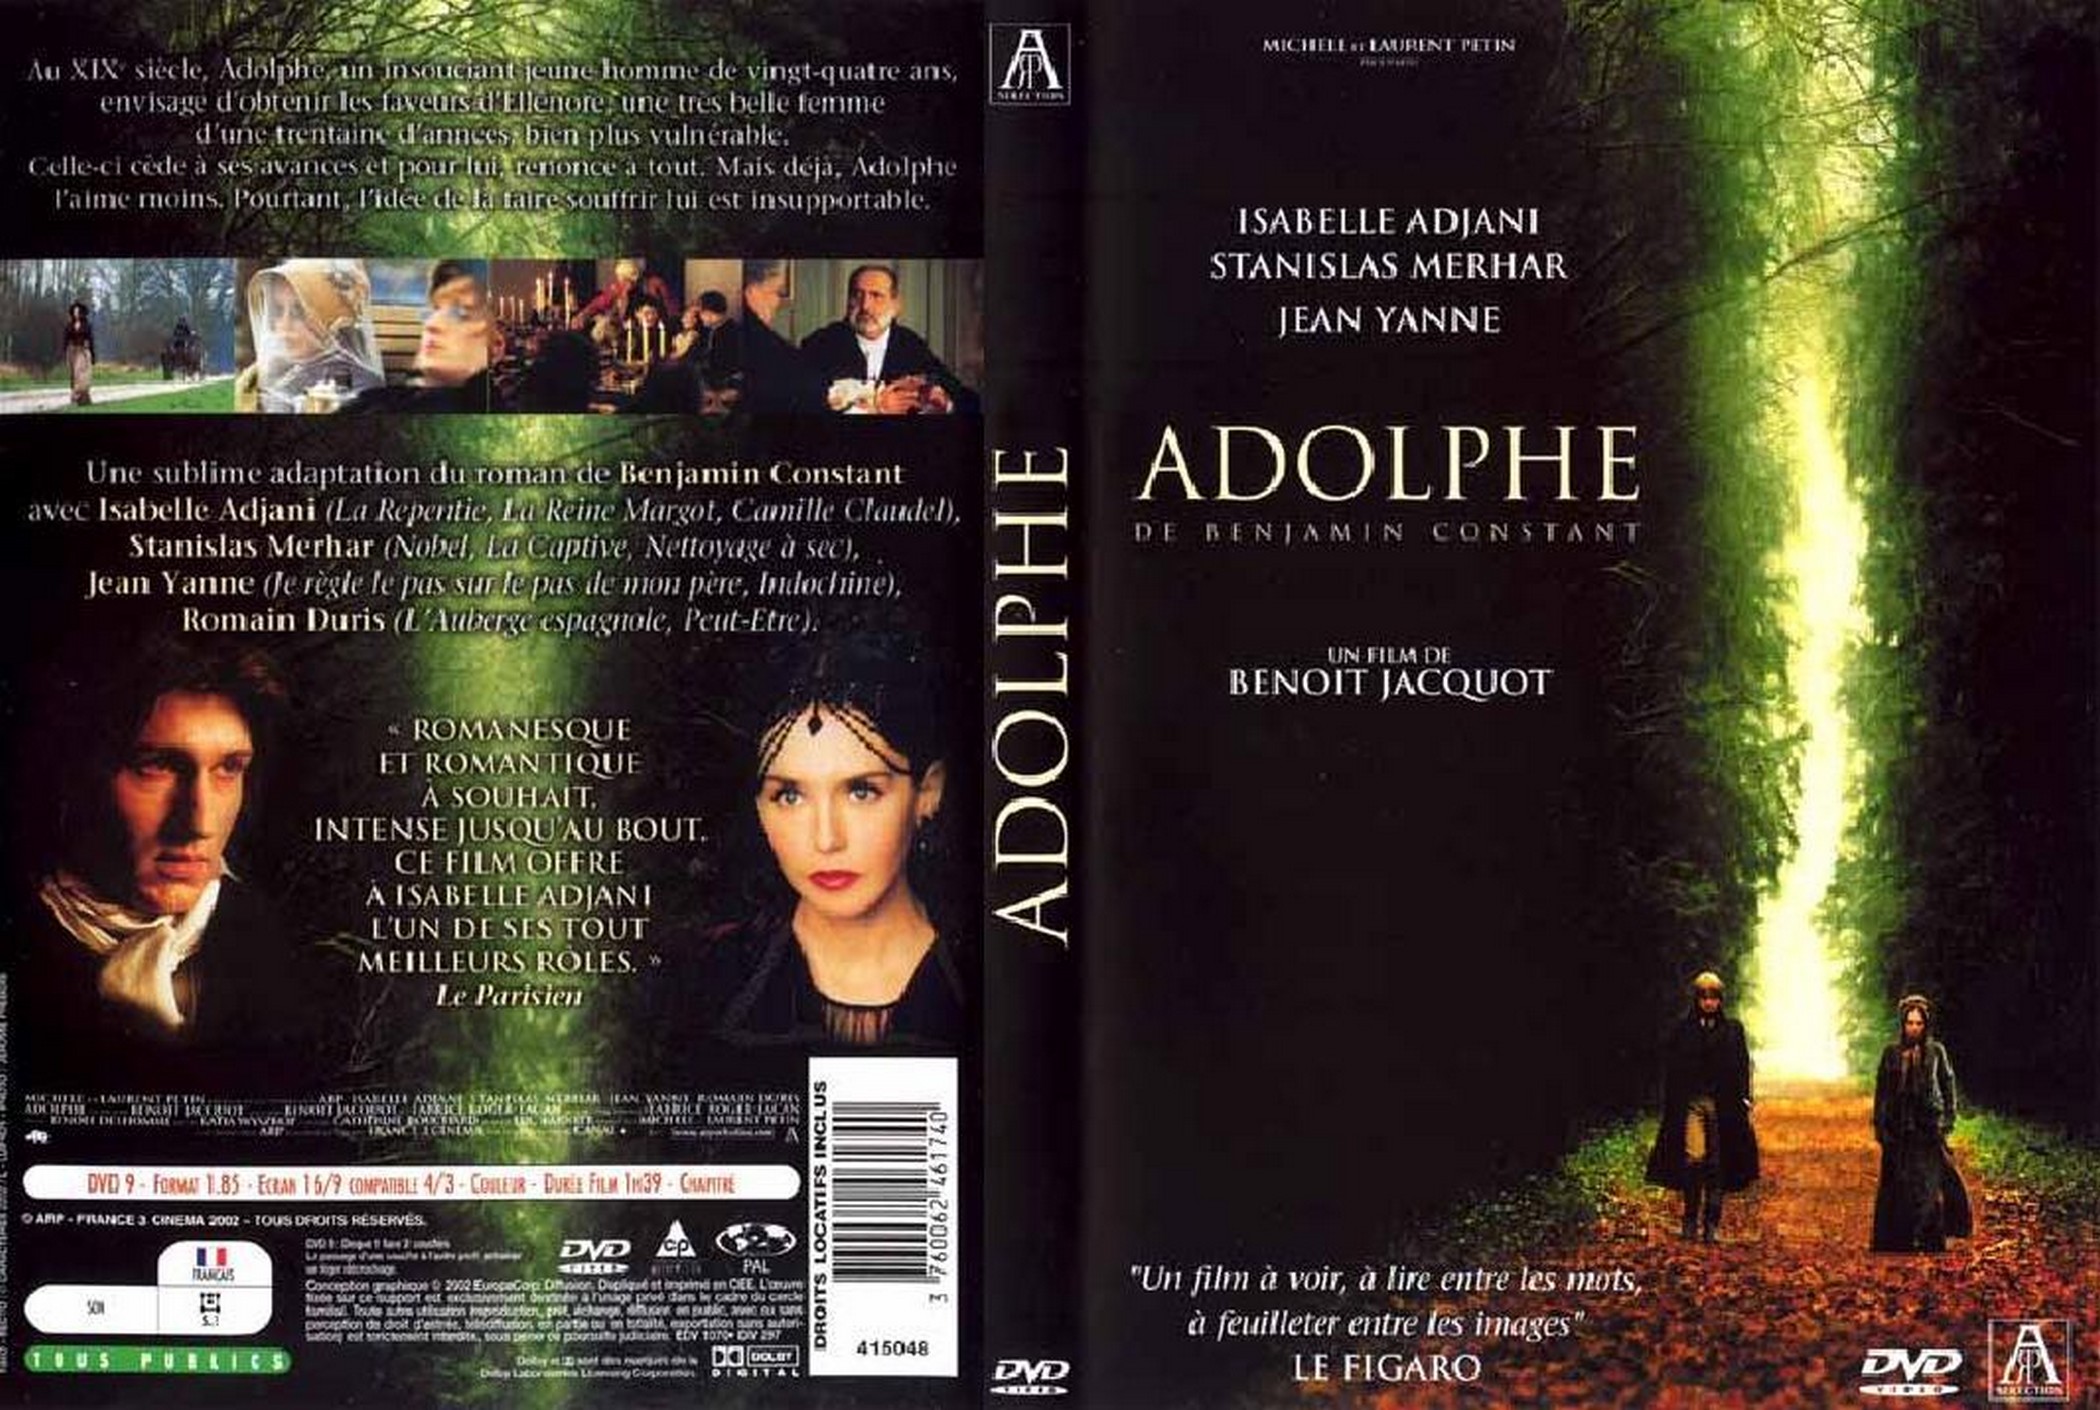 Jaquette DVD Adolphe